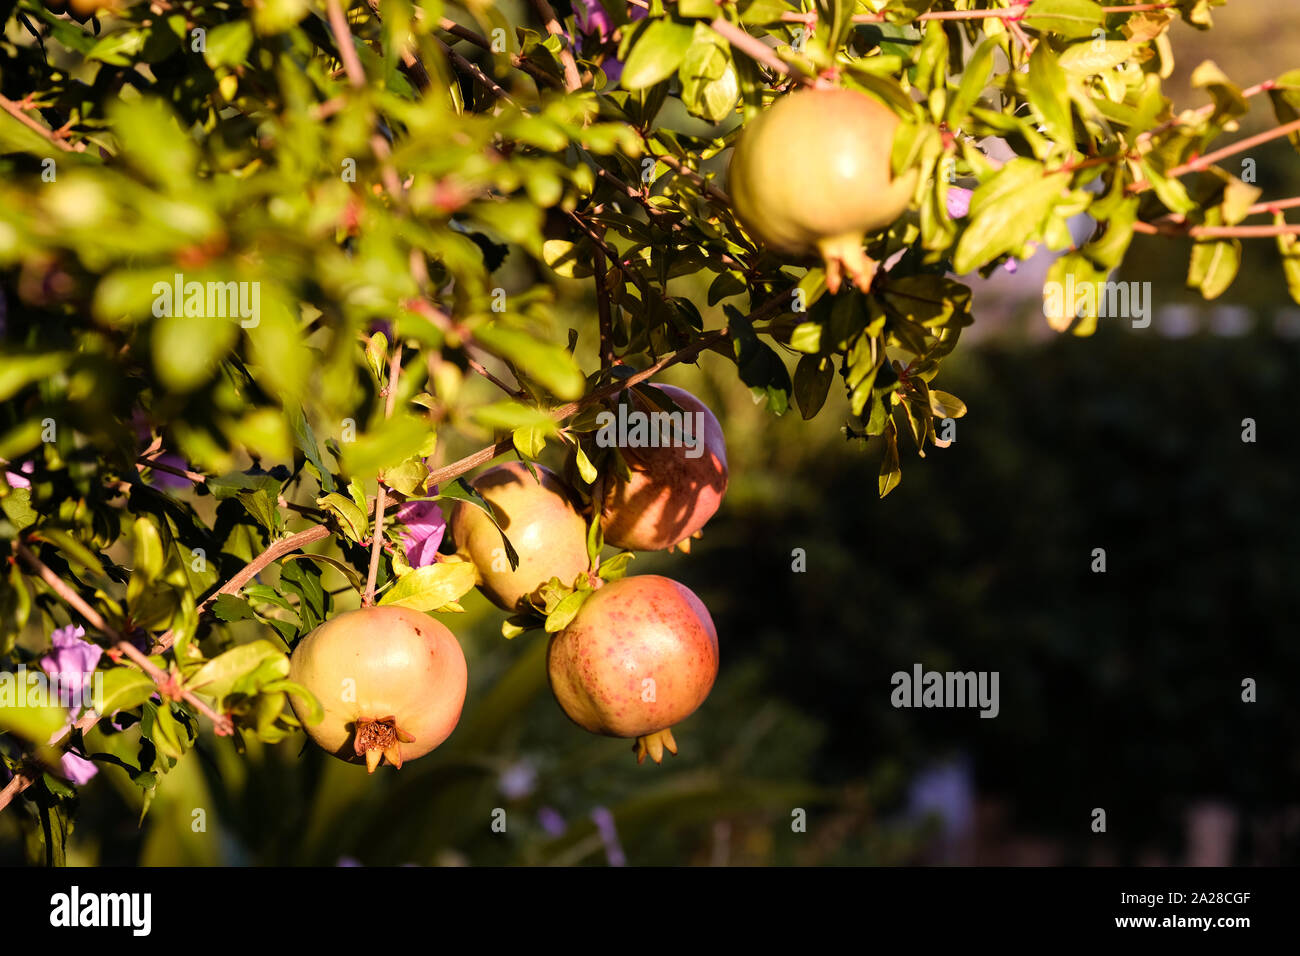 Ripe pomegranates, Punica granatum, hand from a branch on their tree. Both are drenched in early evening sunlight and look delicious Stock Photo